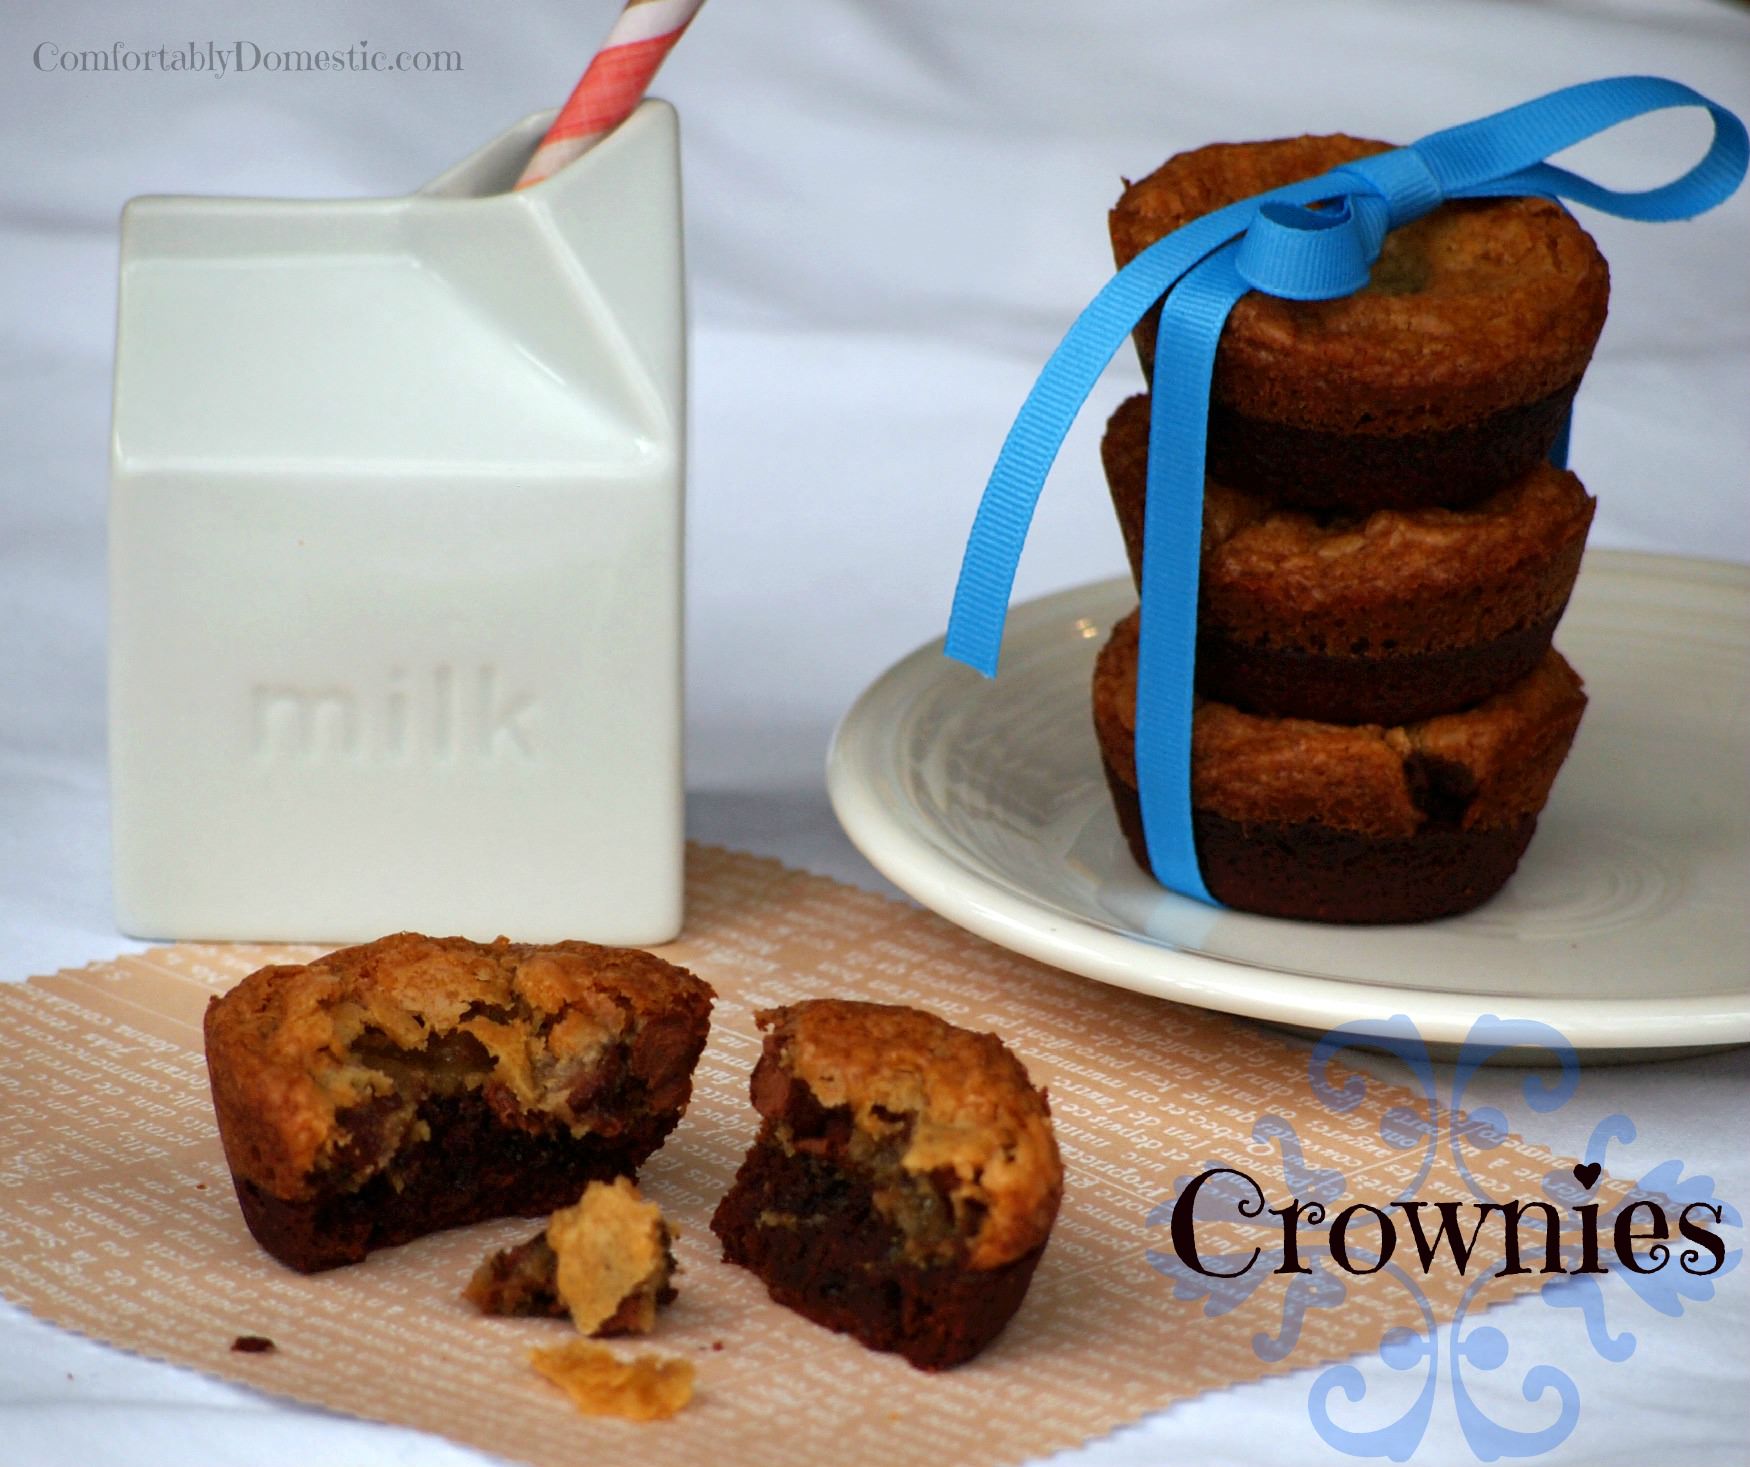 Crownies are a delicious dessert combination of soft chocolate chip cookies and fudgy, chewy brownies. | ComfortablyDomestic.com